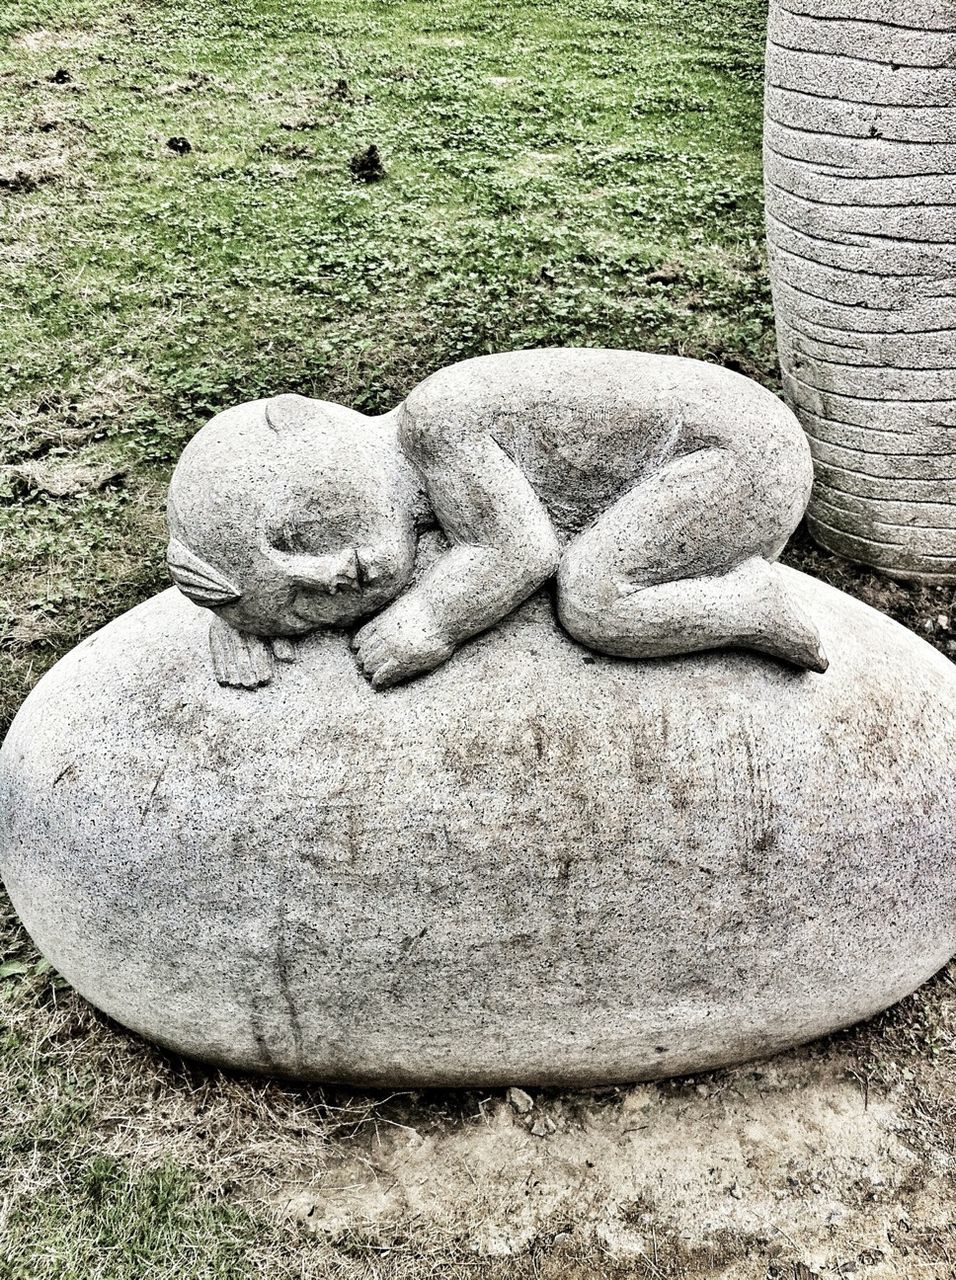 sculpture, art, human representation, art and craft, statue, creativity, animal representation, outdoors, day, carving - craft product, no people, stone, high angle view, stone material, wall - building feature, close-up, grass, stone - object, animal themes